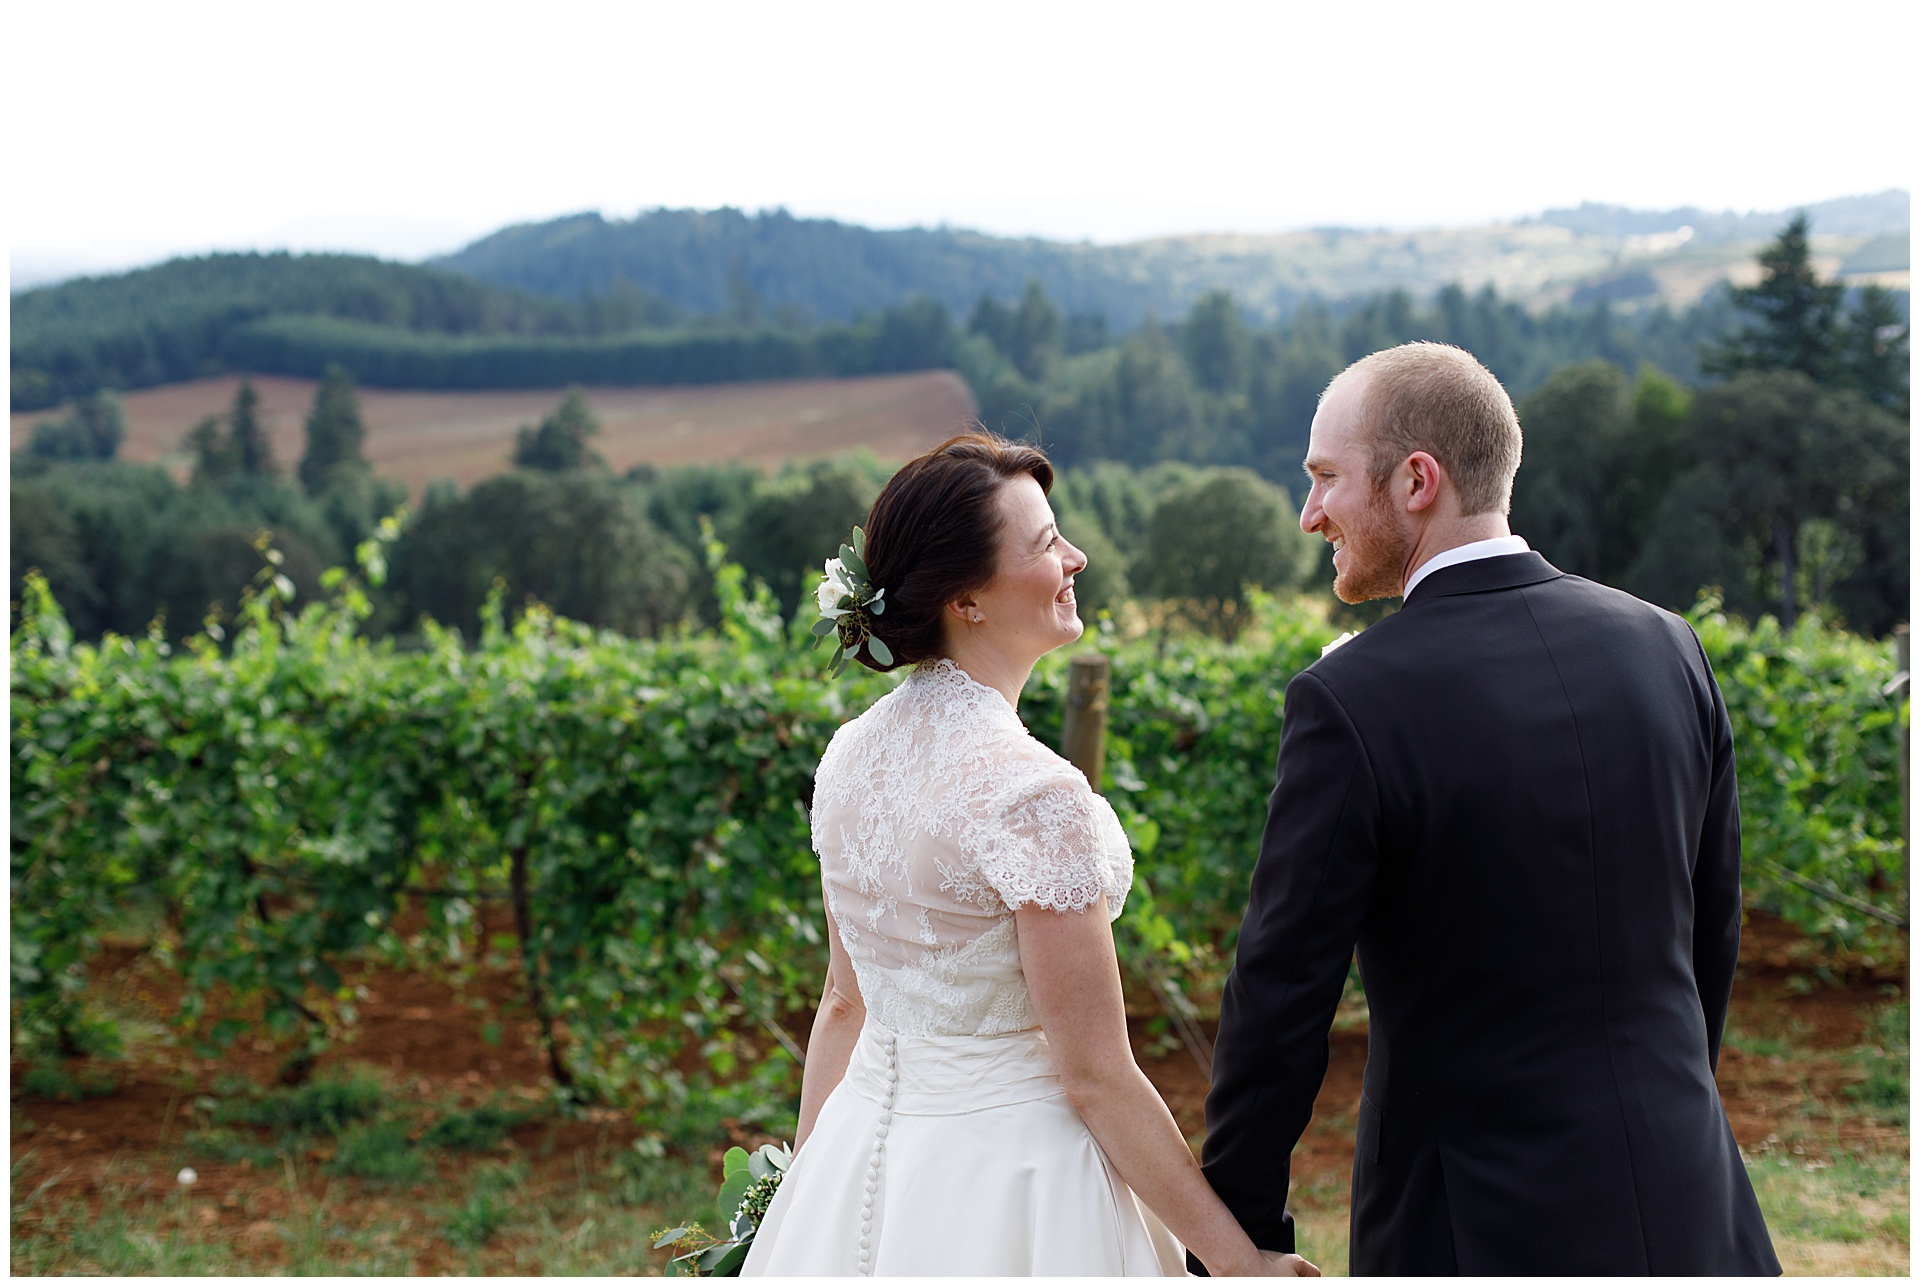 bride and groom at Willamette Valley Vineyards by oregon wedding photographer Alison Smith